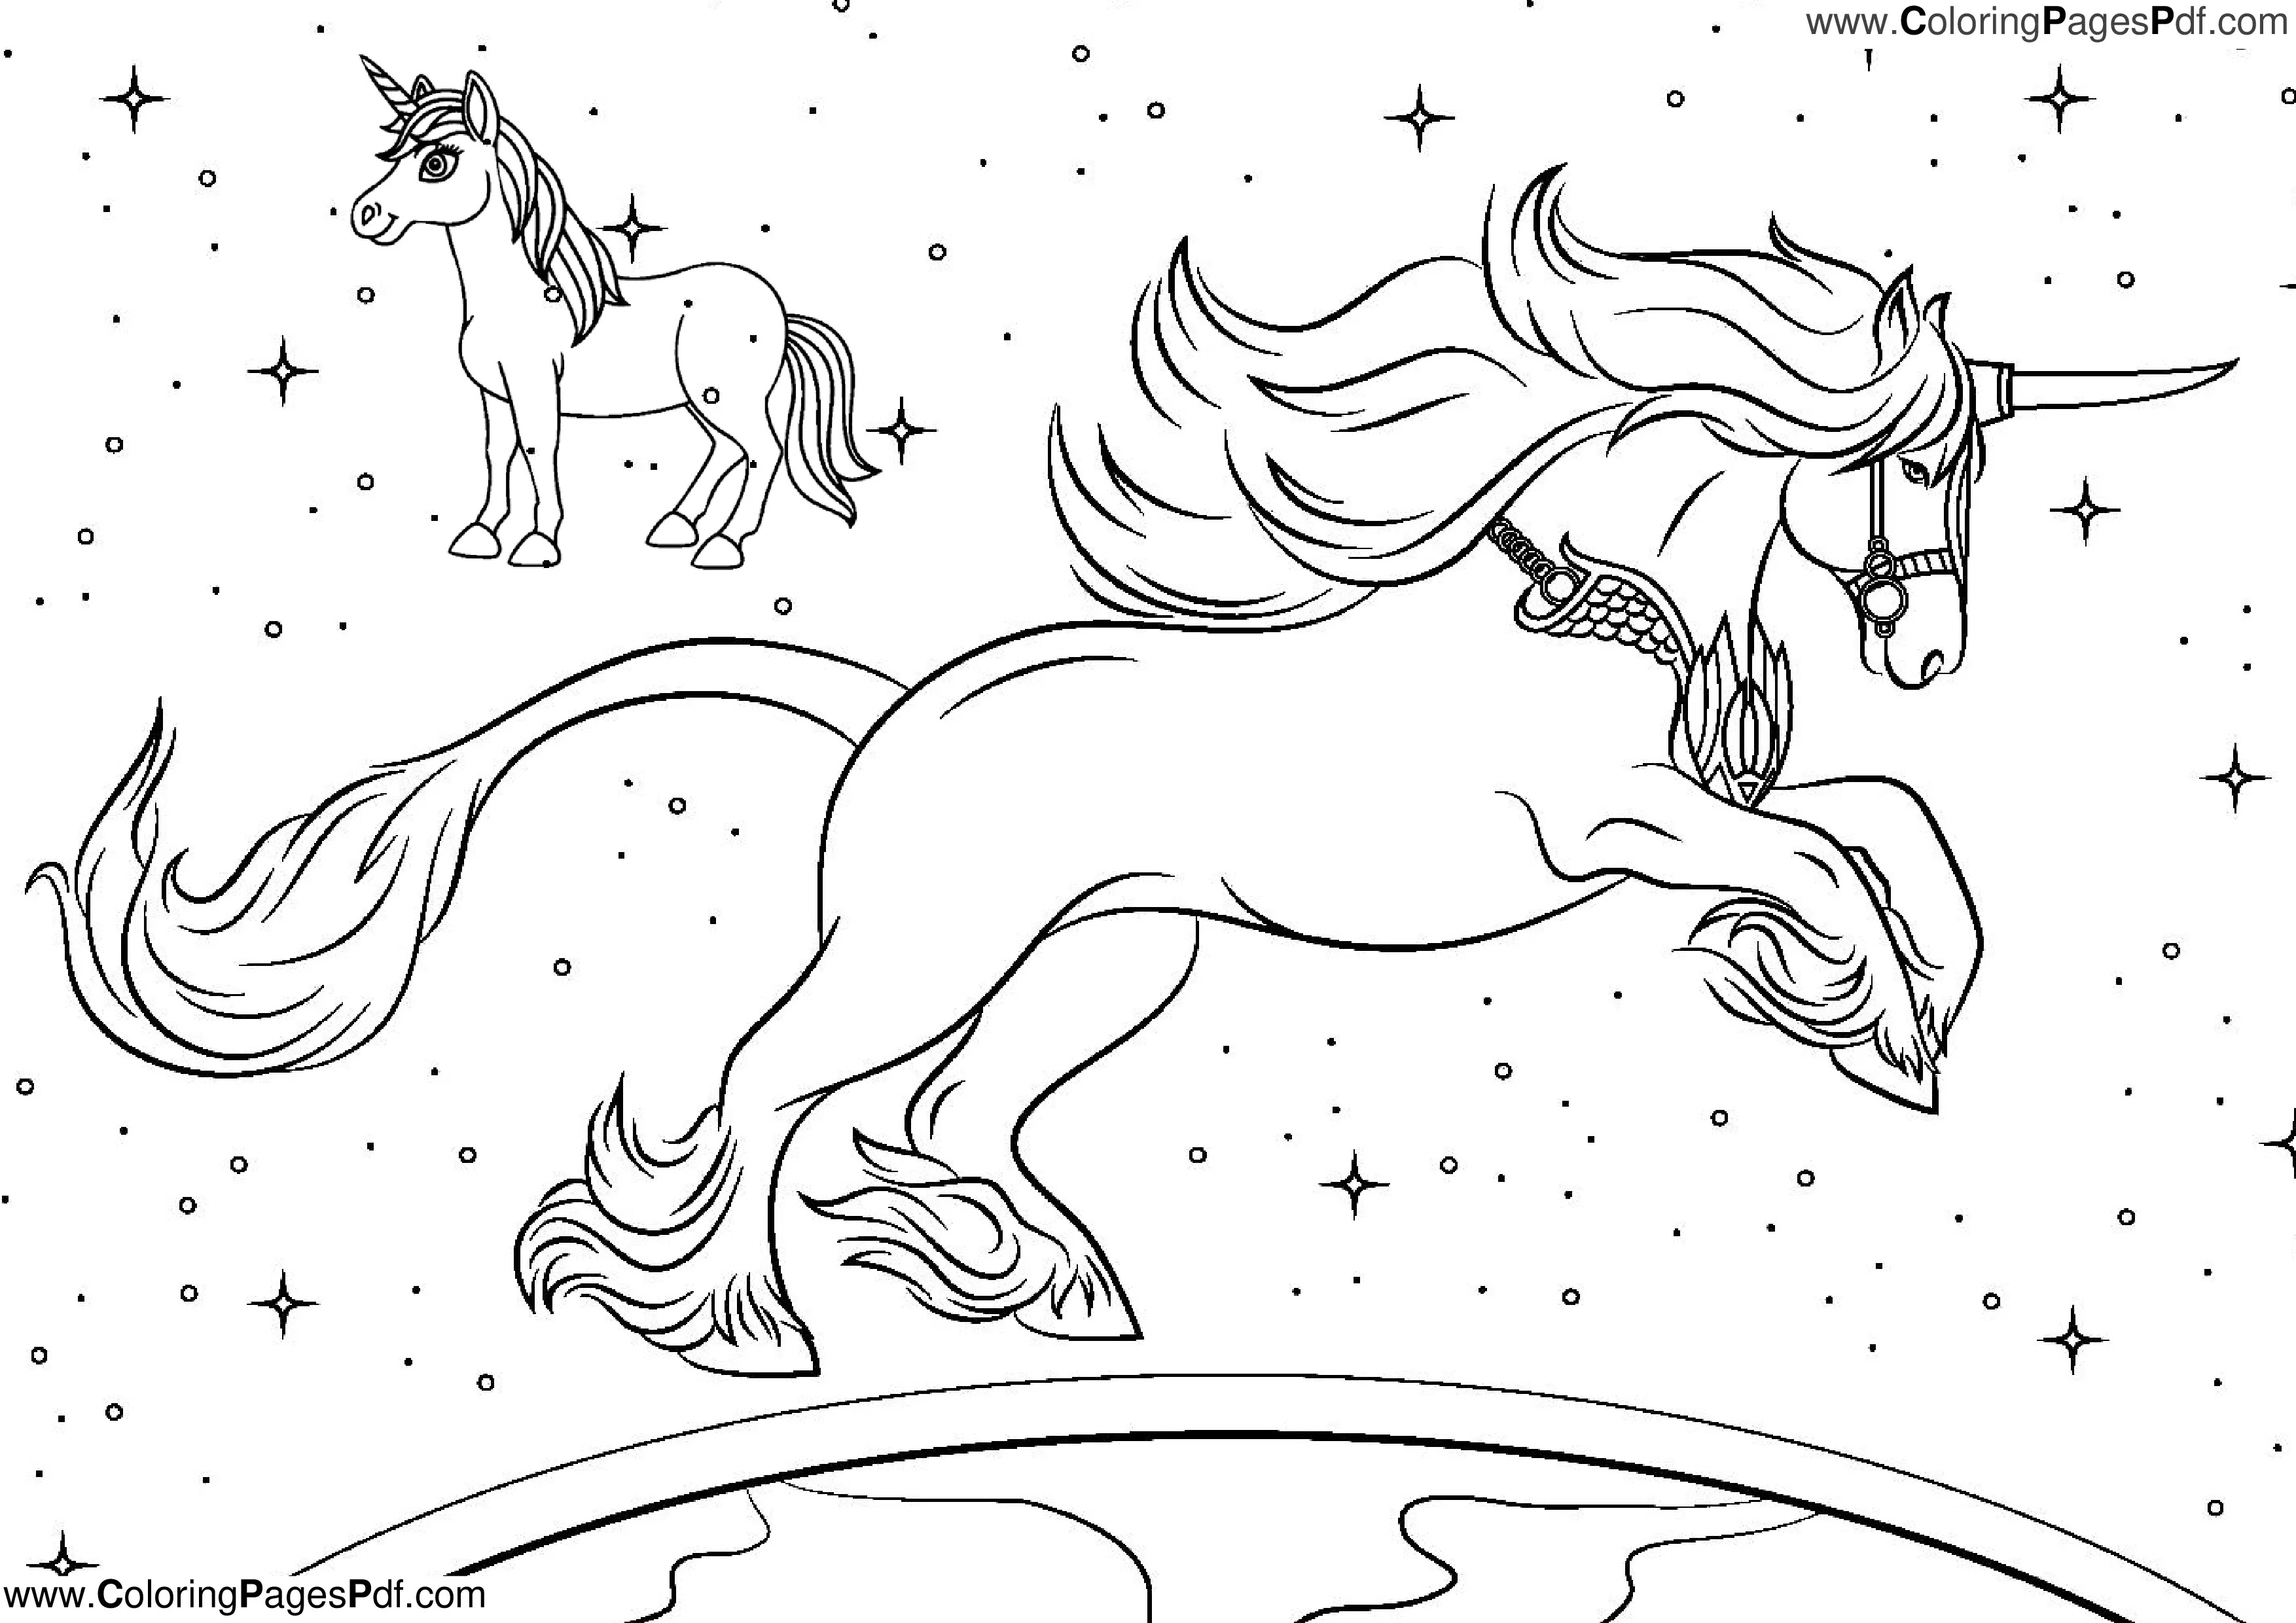 Free unicorn coloring pages